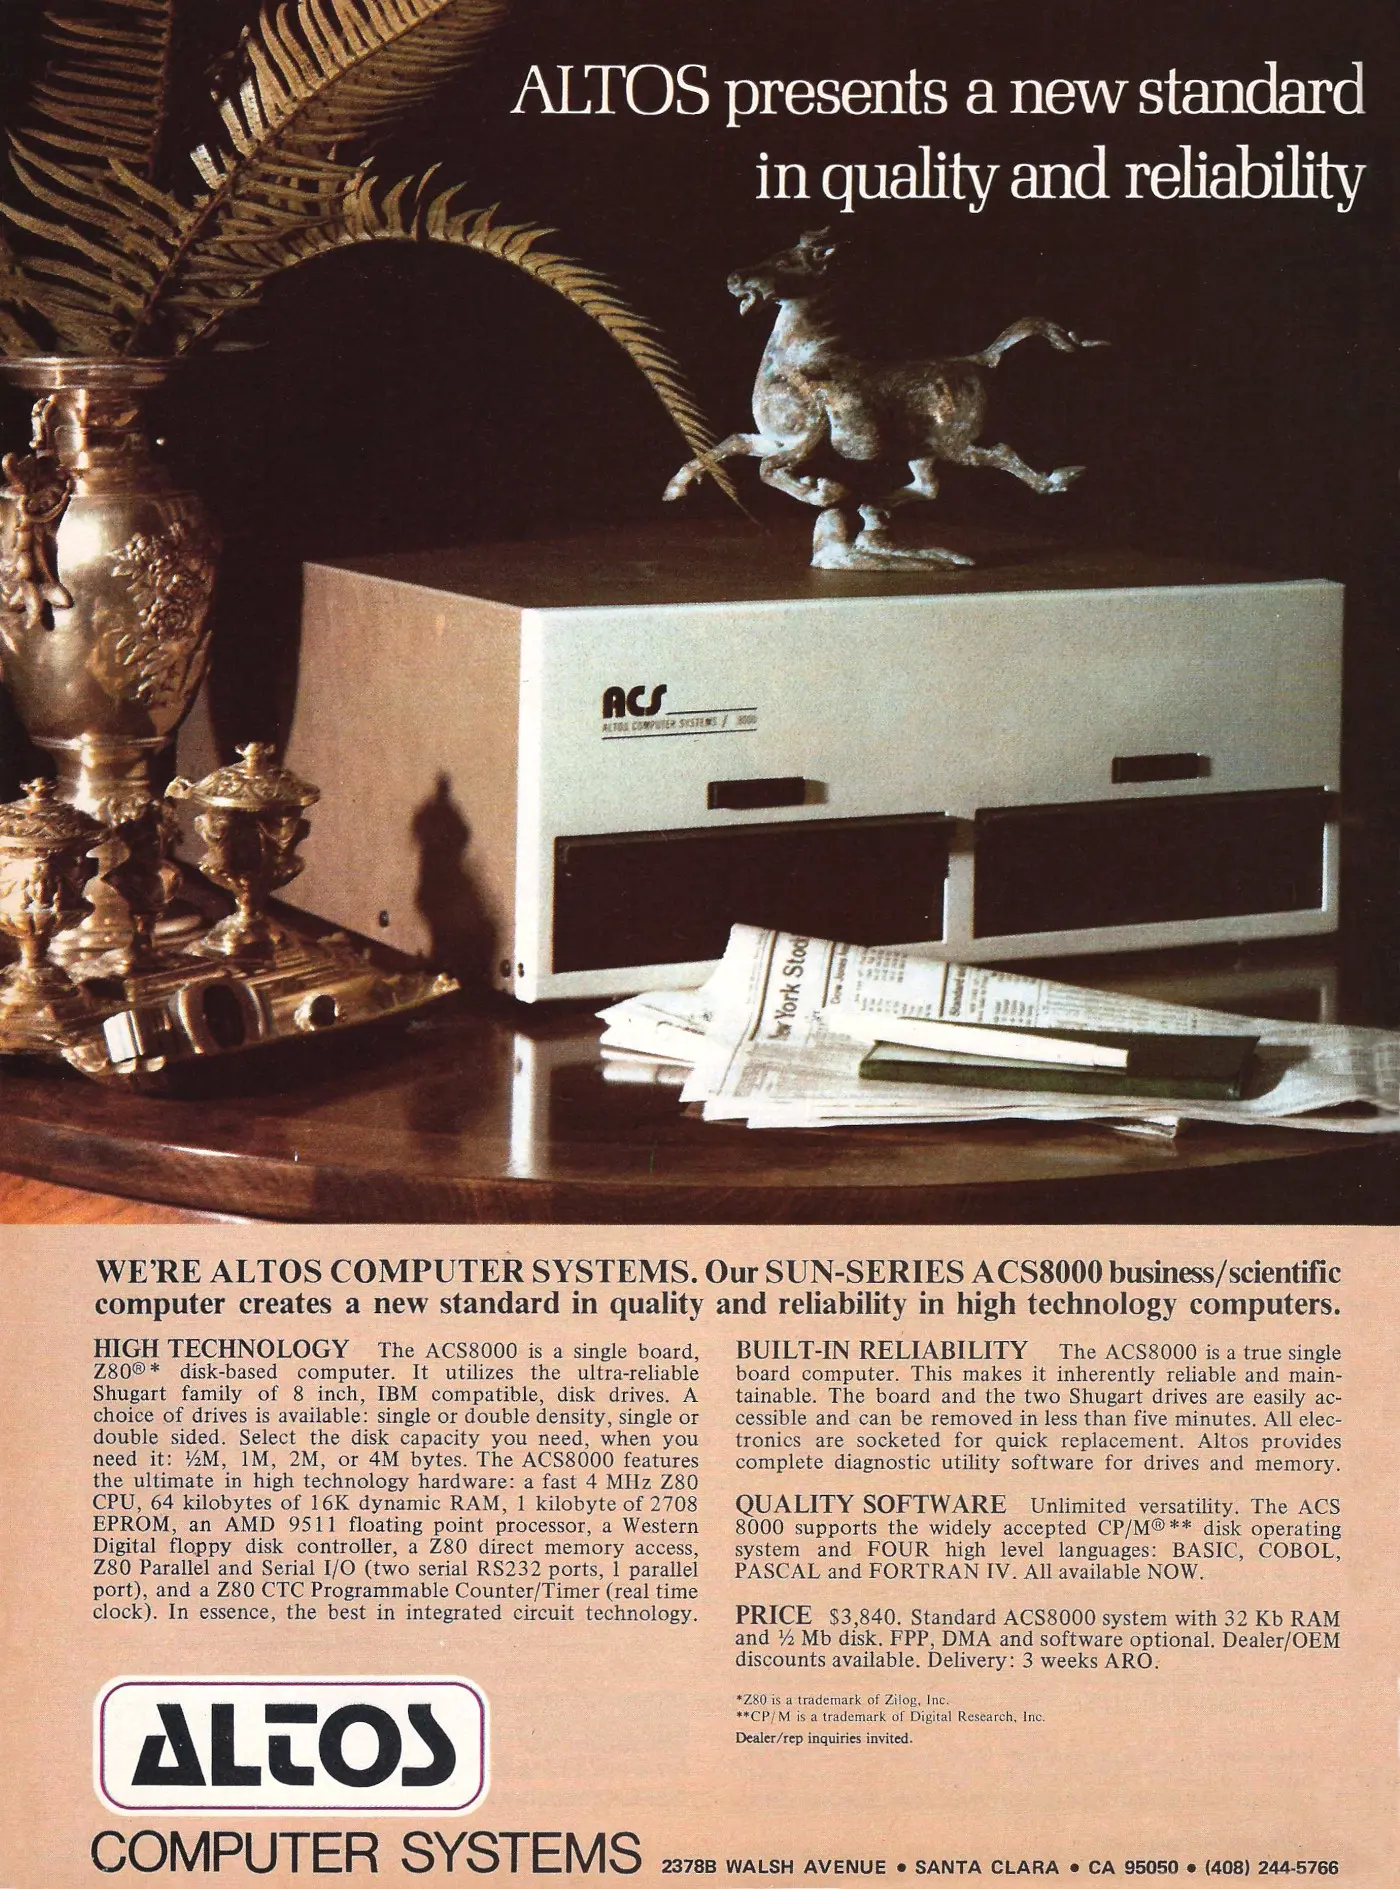 Altos Advert: Altos presents a new standard in quality and reliability - Altos ACS8000, from Byte - The Small Systems Journal, August 1978